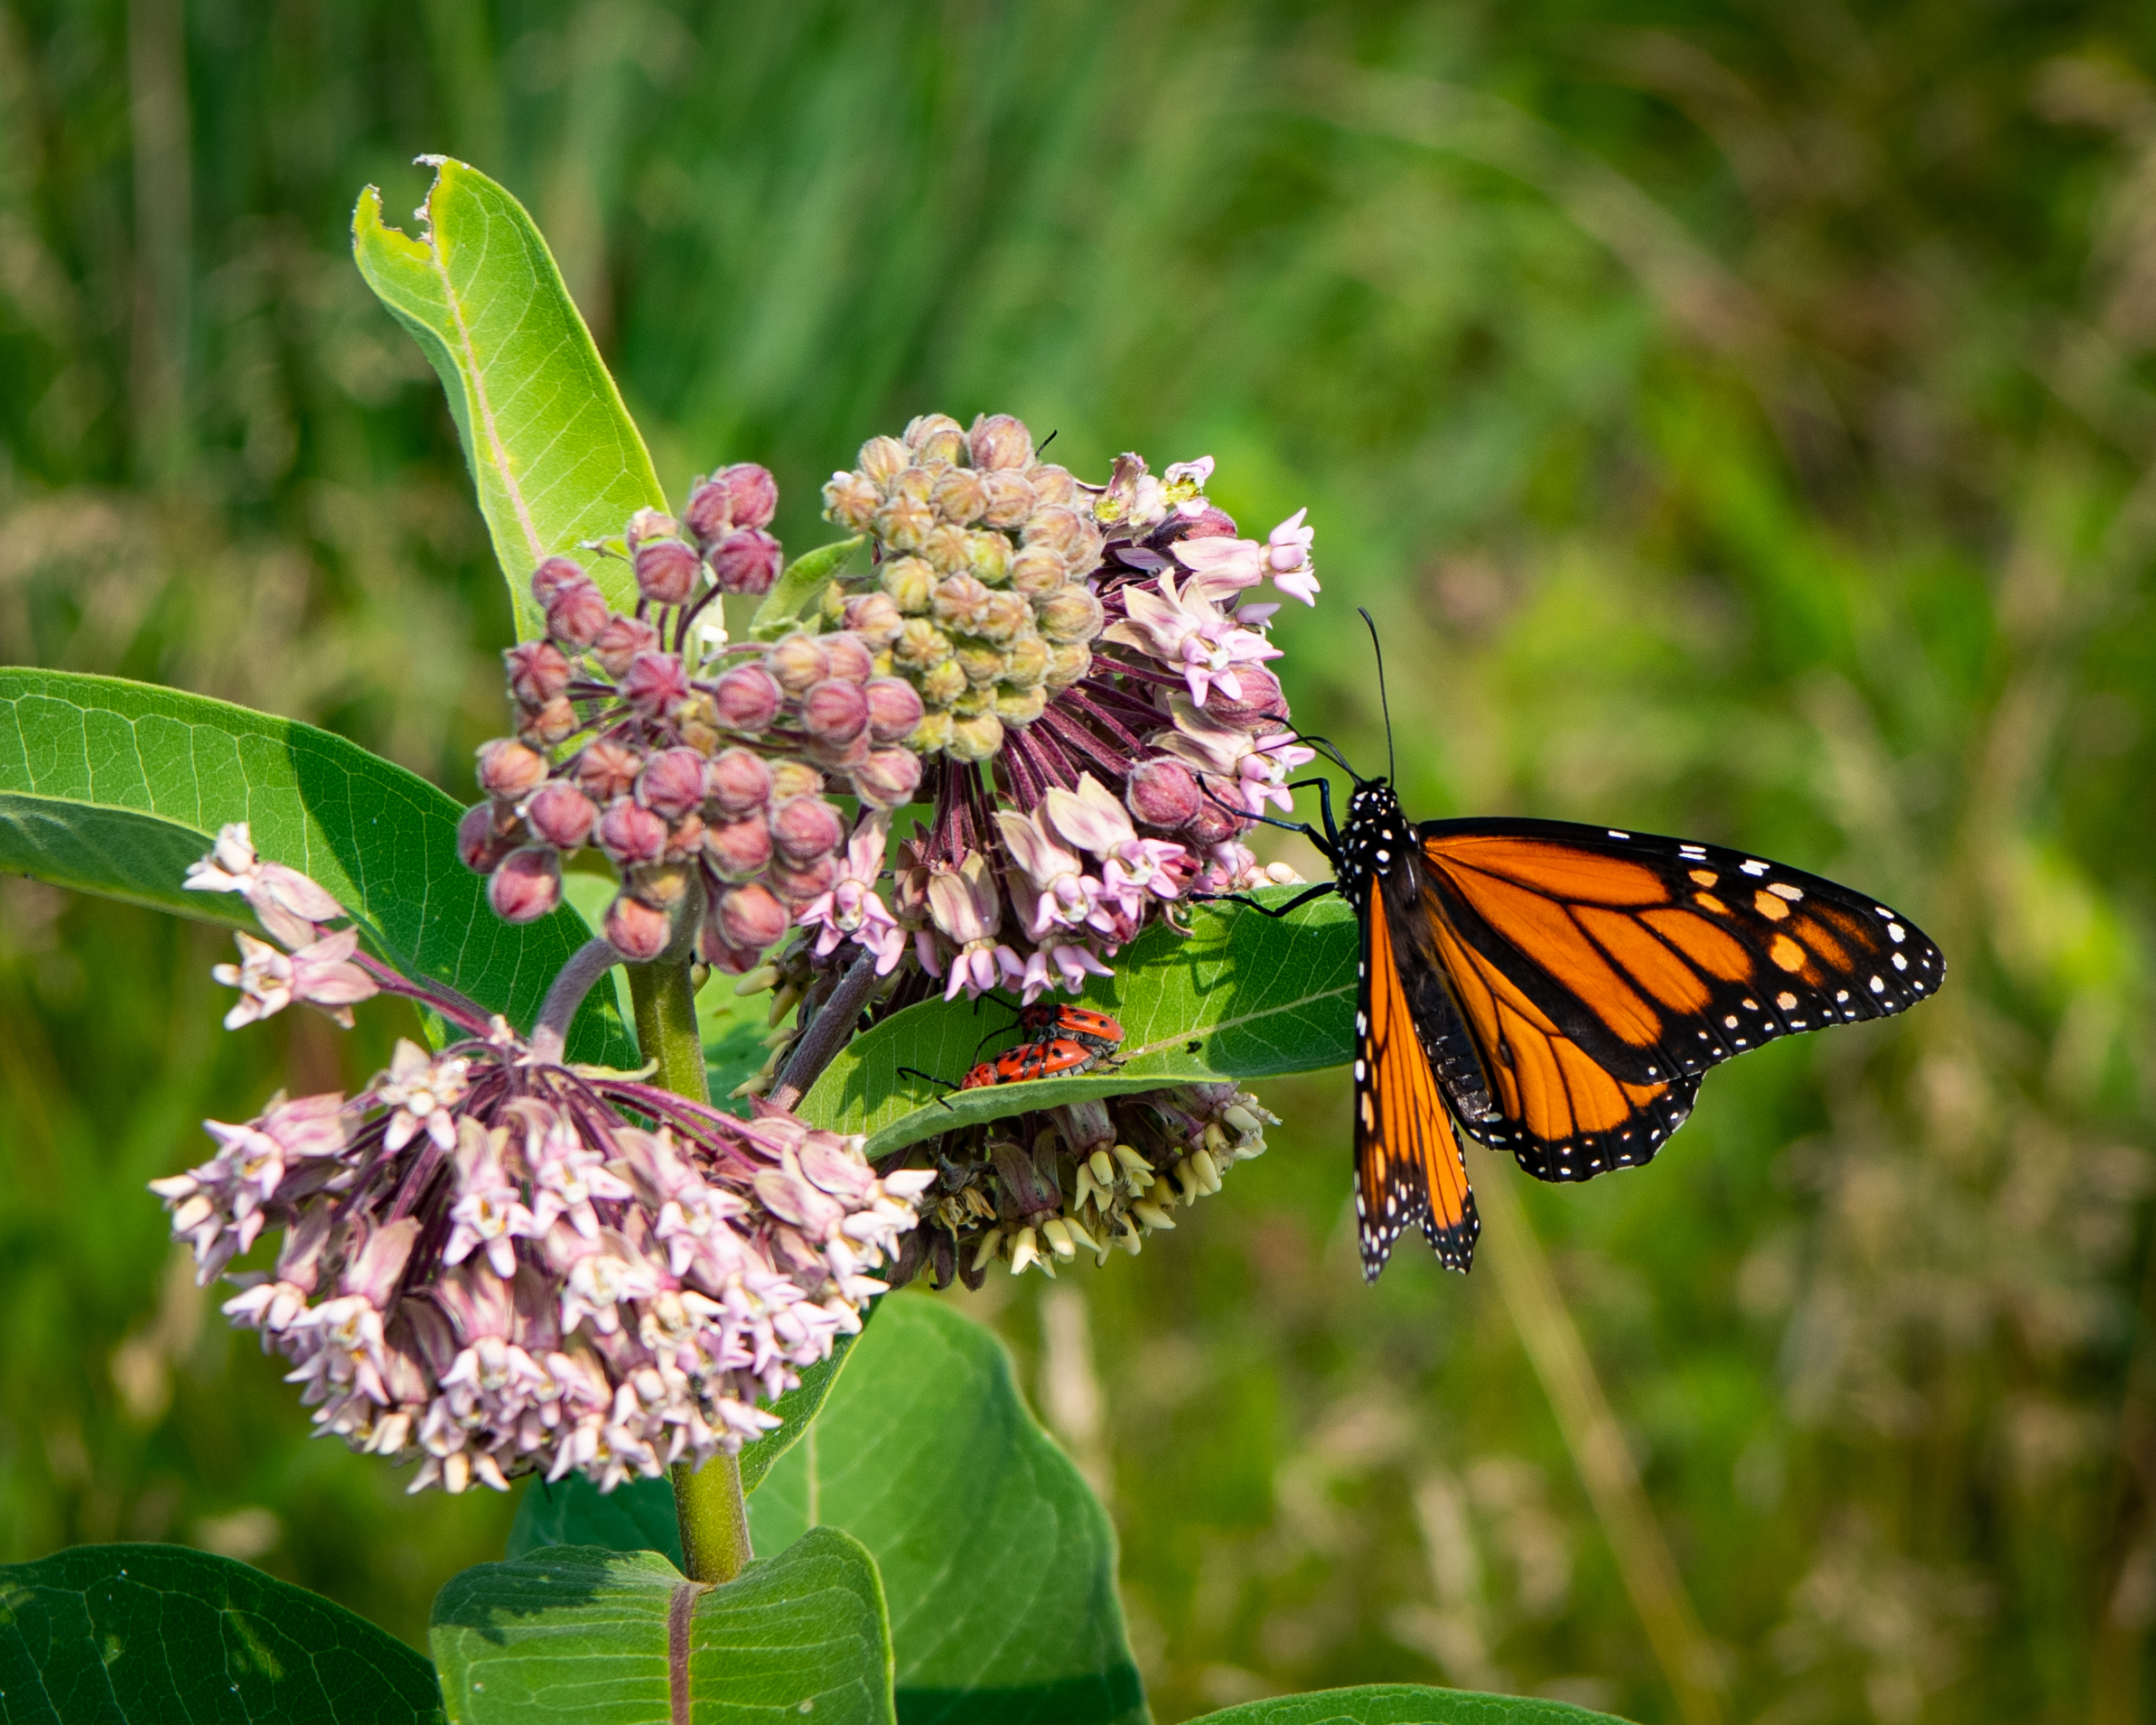 Bunches of light pink milkweeds flowers with a black and orange monarch butterfly on one.